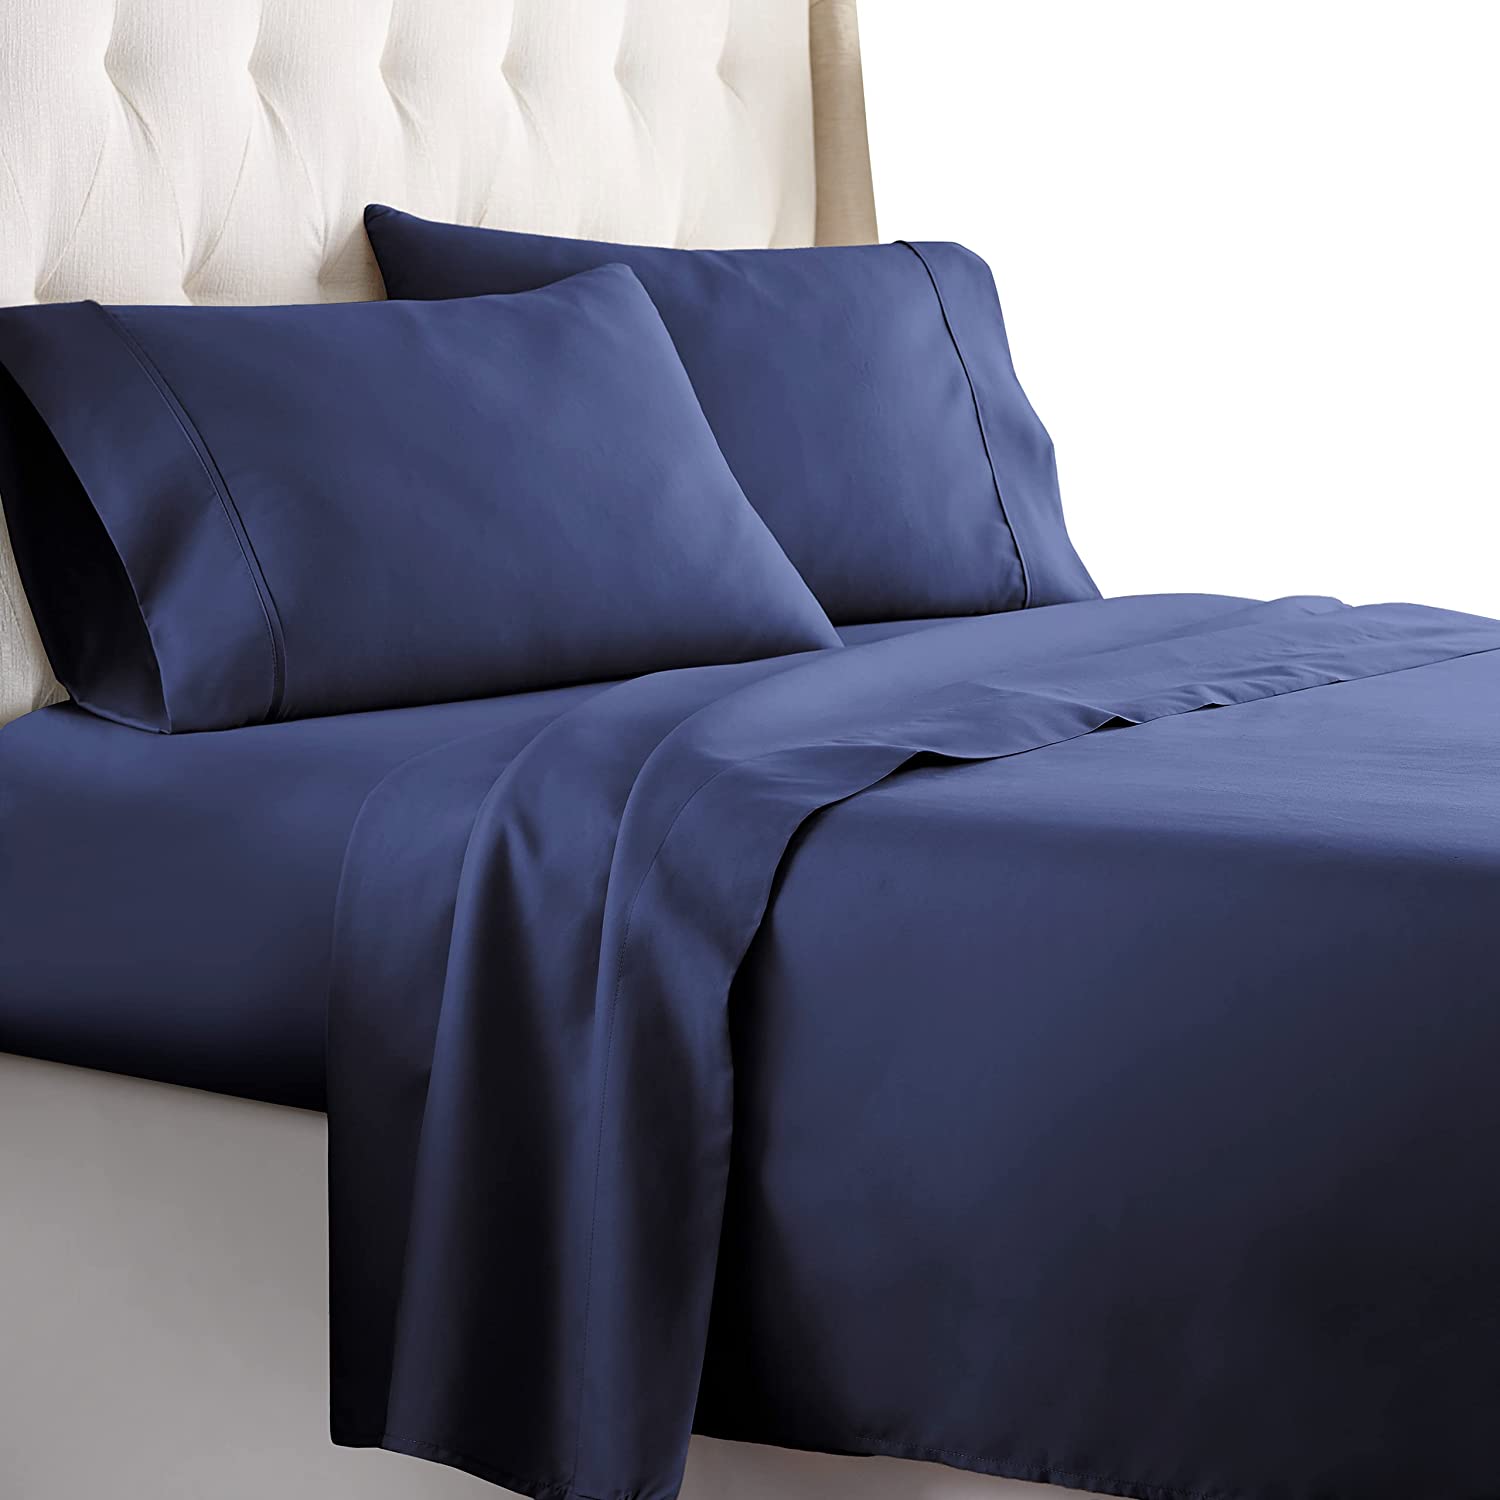 12 Inch Pocket Fitted Sheet Navy Blue 1000TC Egyptian Cotton at-EgyptianHomeLinens.com